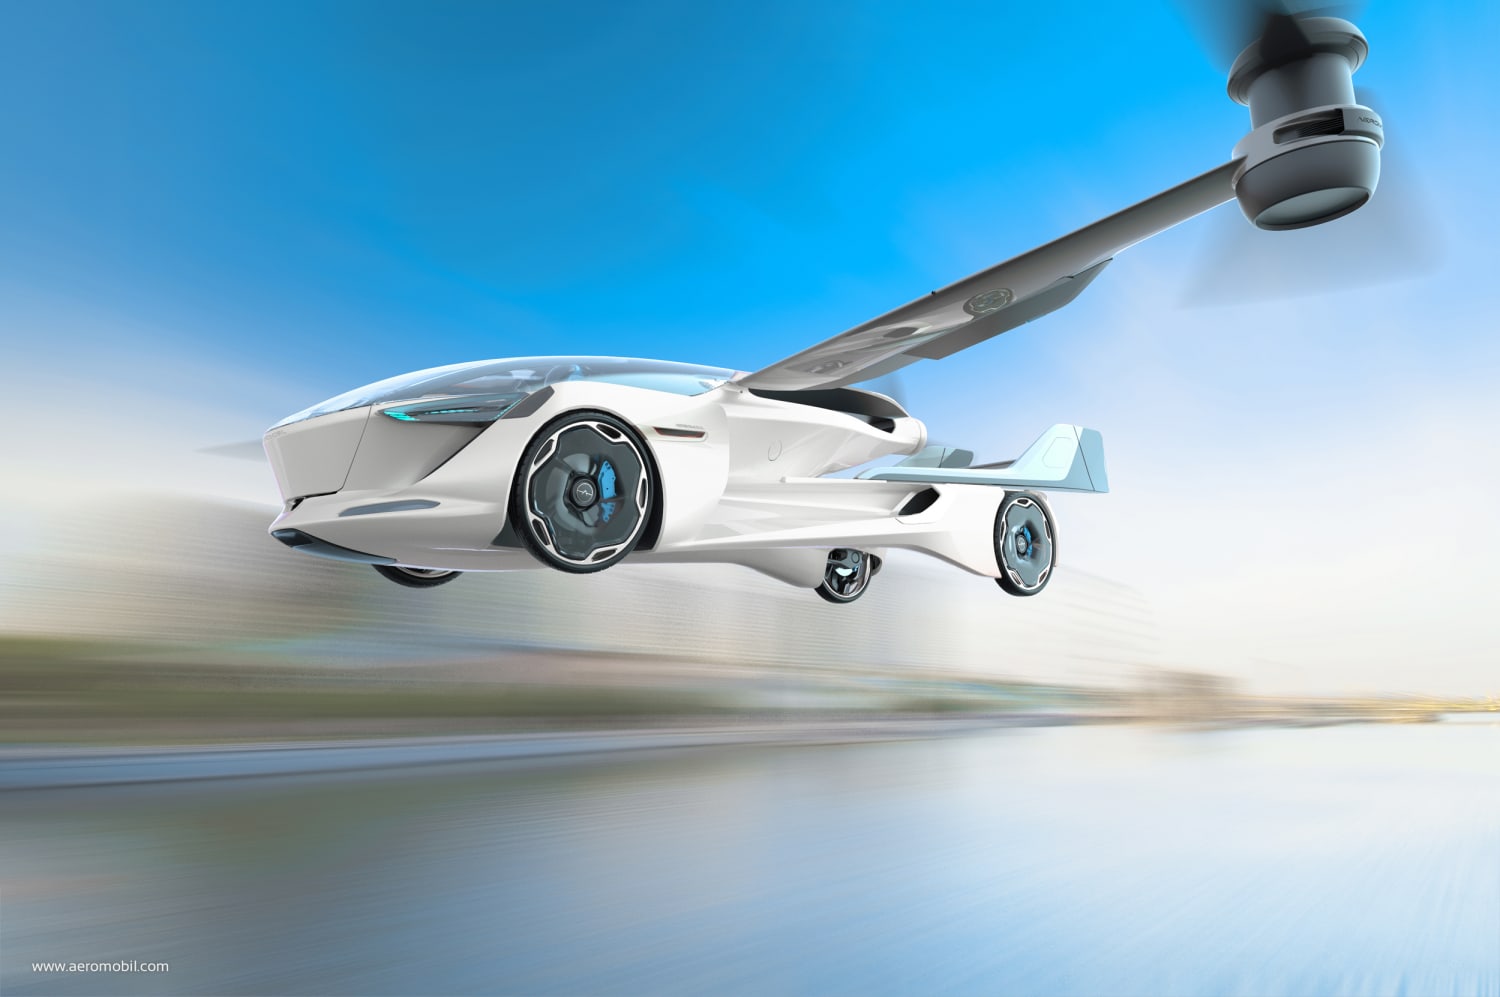 Will this futuristic flying car ever get off the ground?